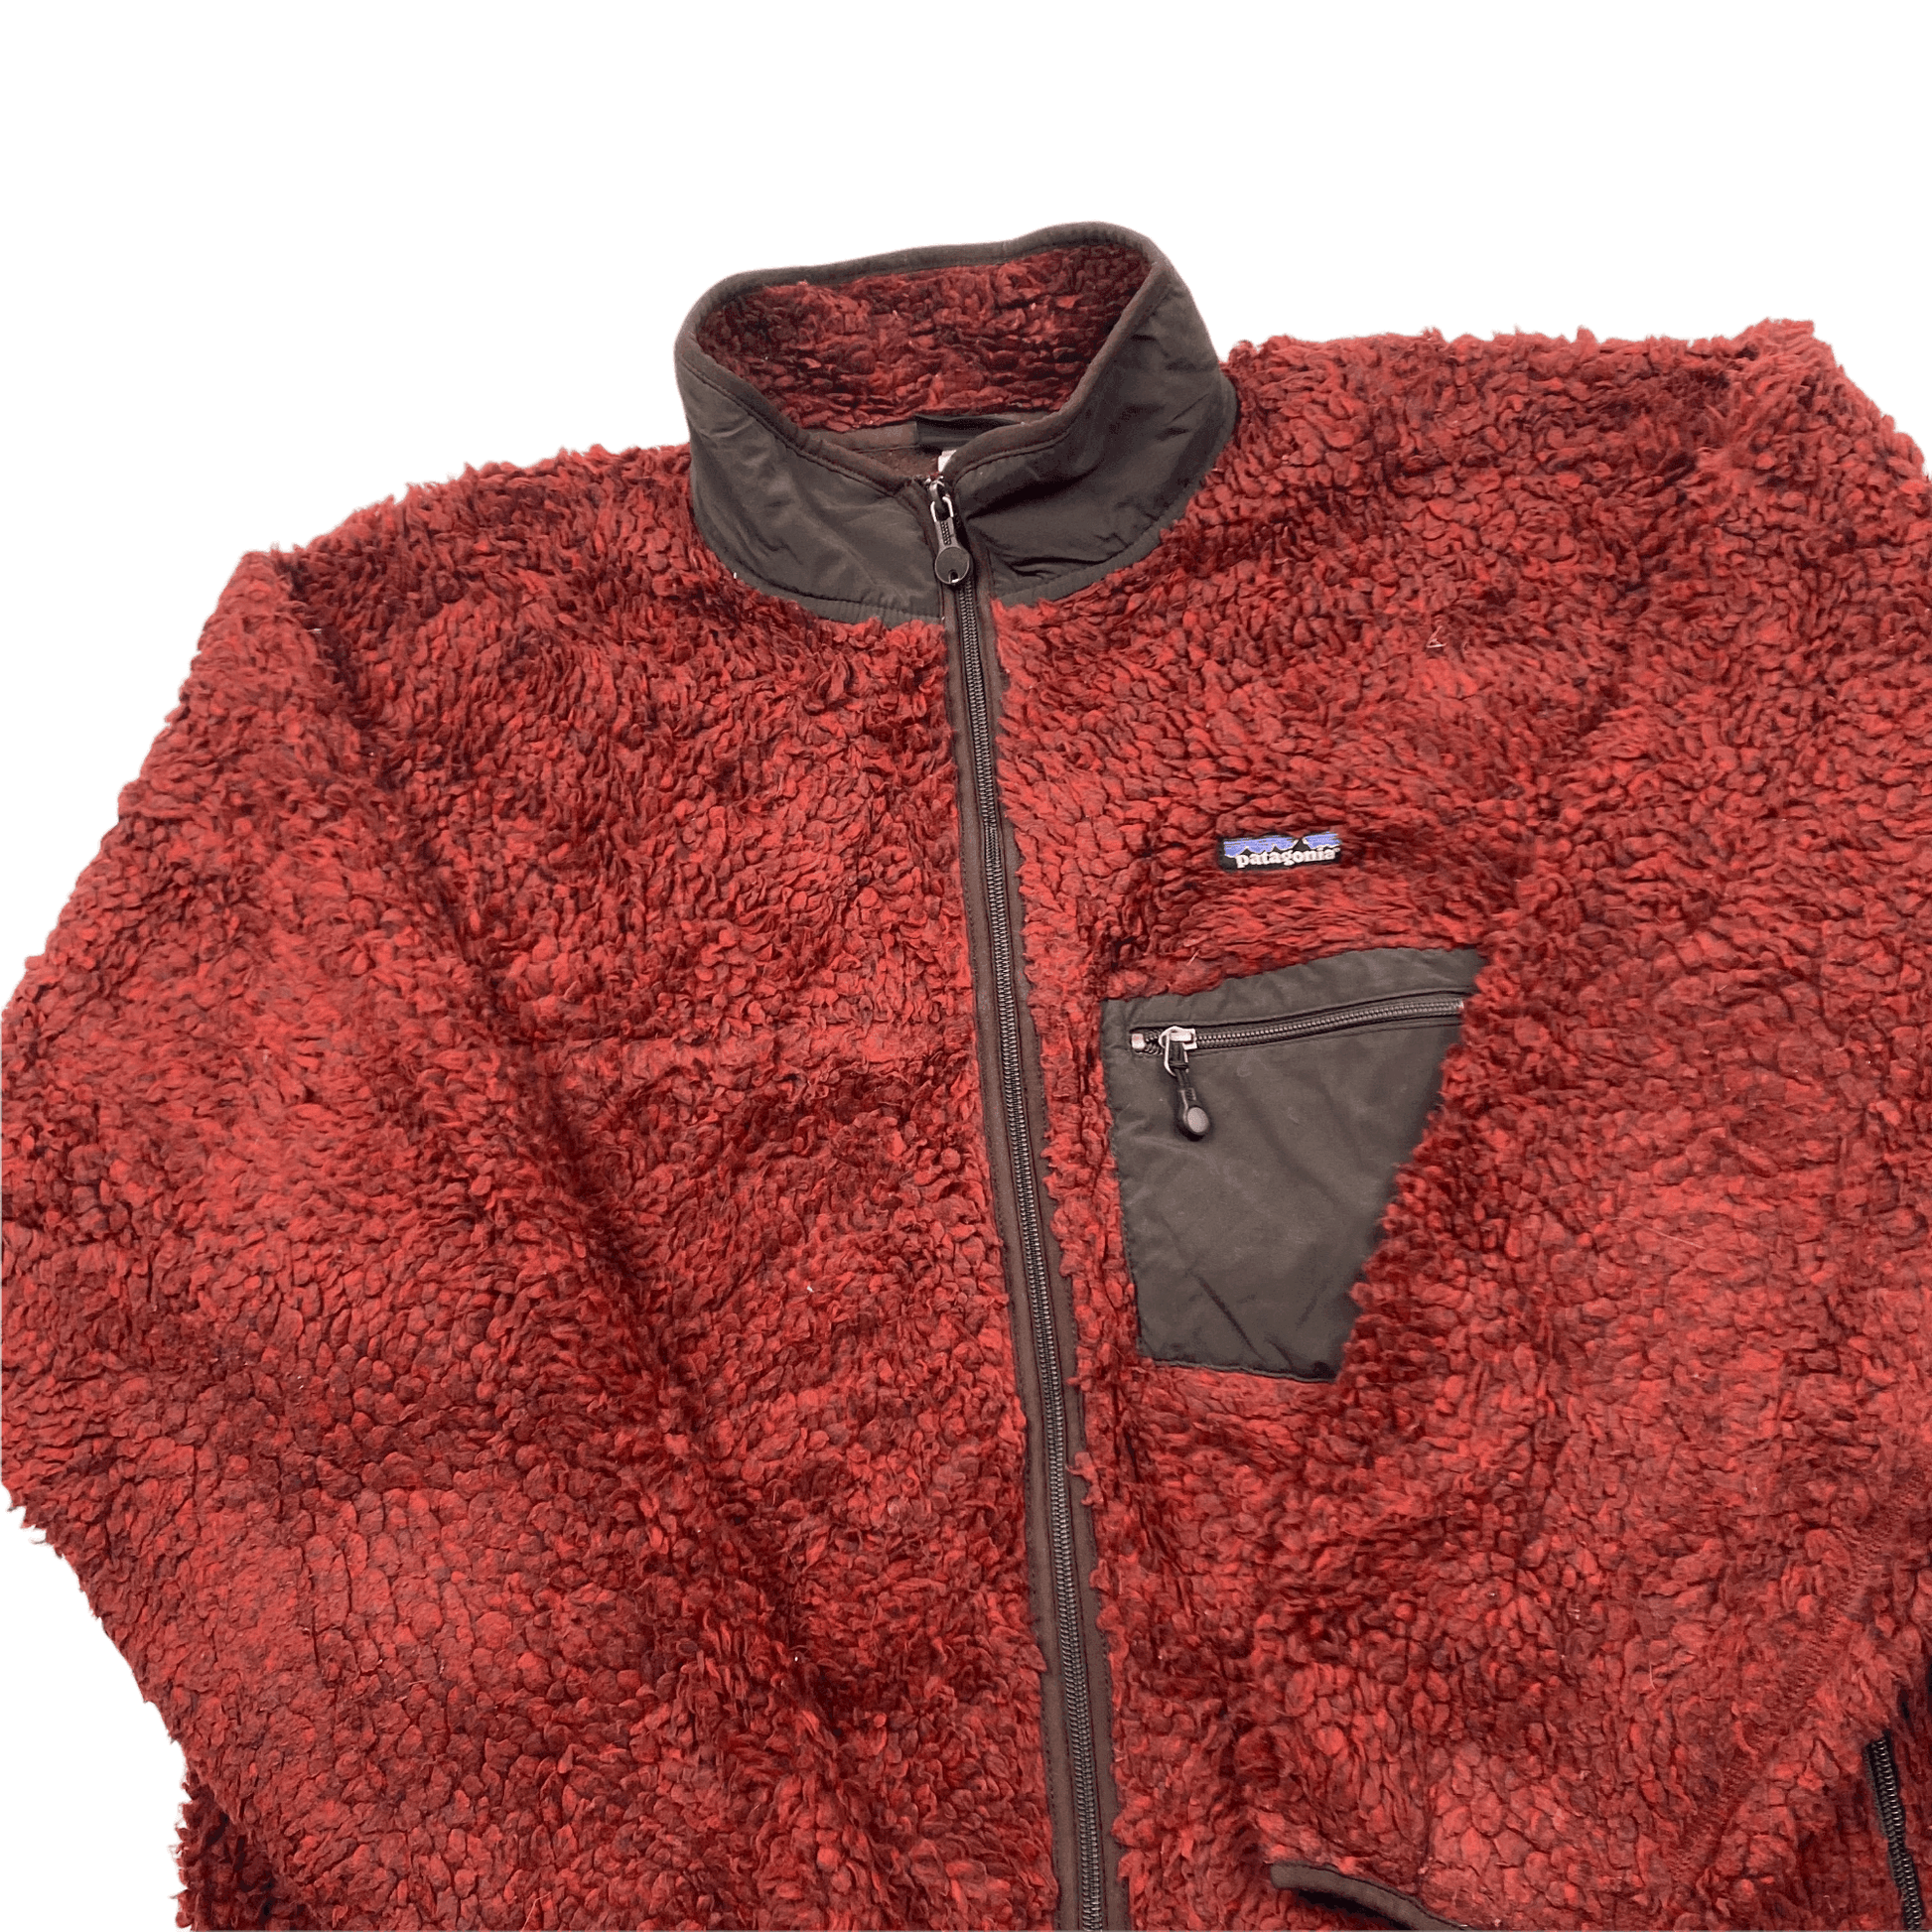 Vintage 90s Red/ Maroon/ Brown Patagonia Full Zip Sherpa Classic Retro X Deep Pile Fleece Jacket - XXL (Recommended Size - Extra Large) - The Streetwear Studio